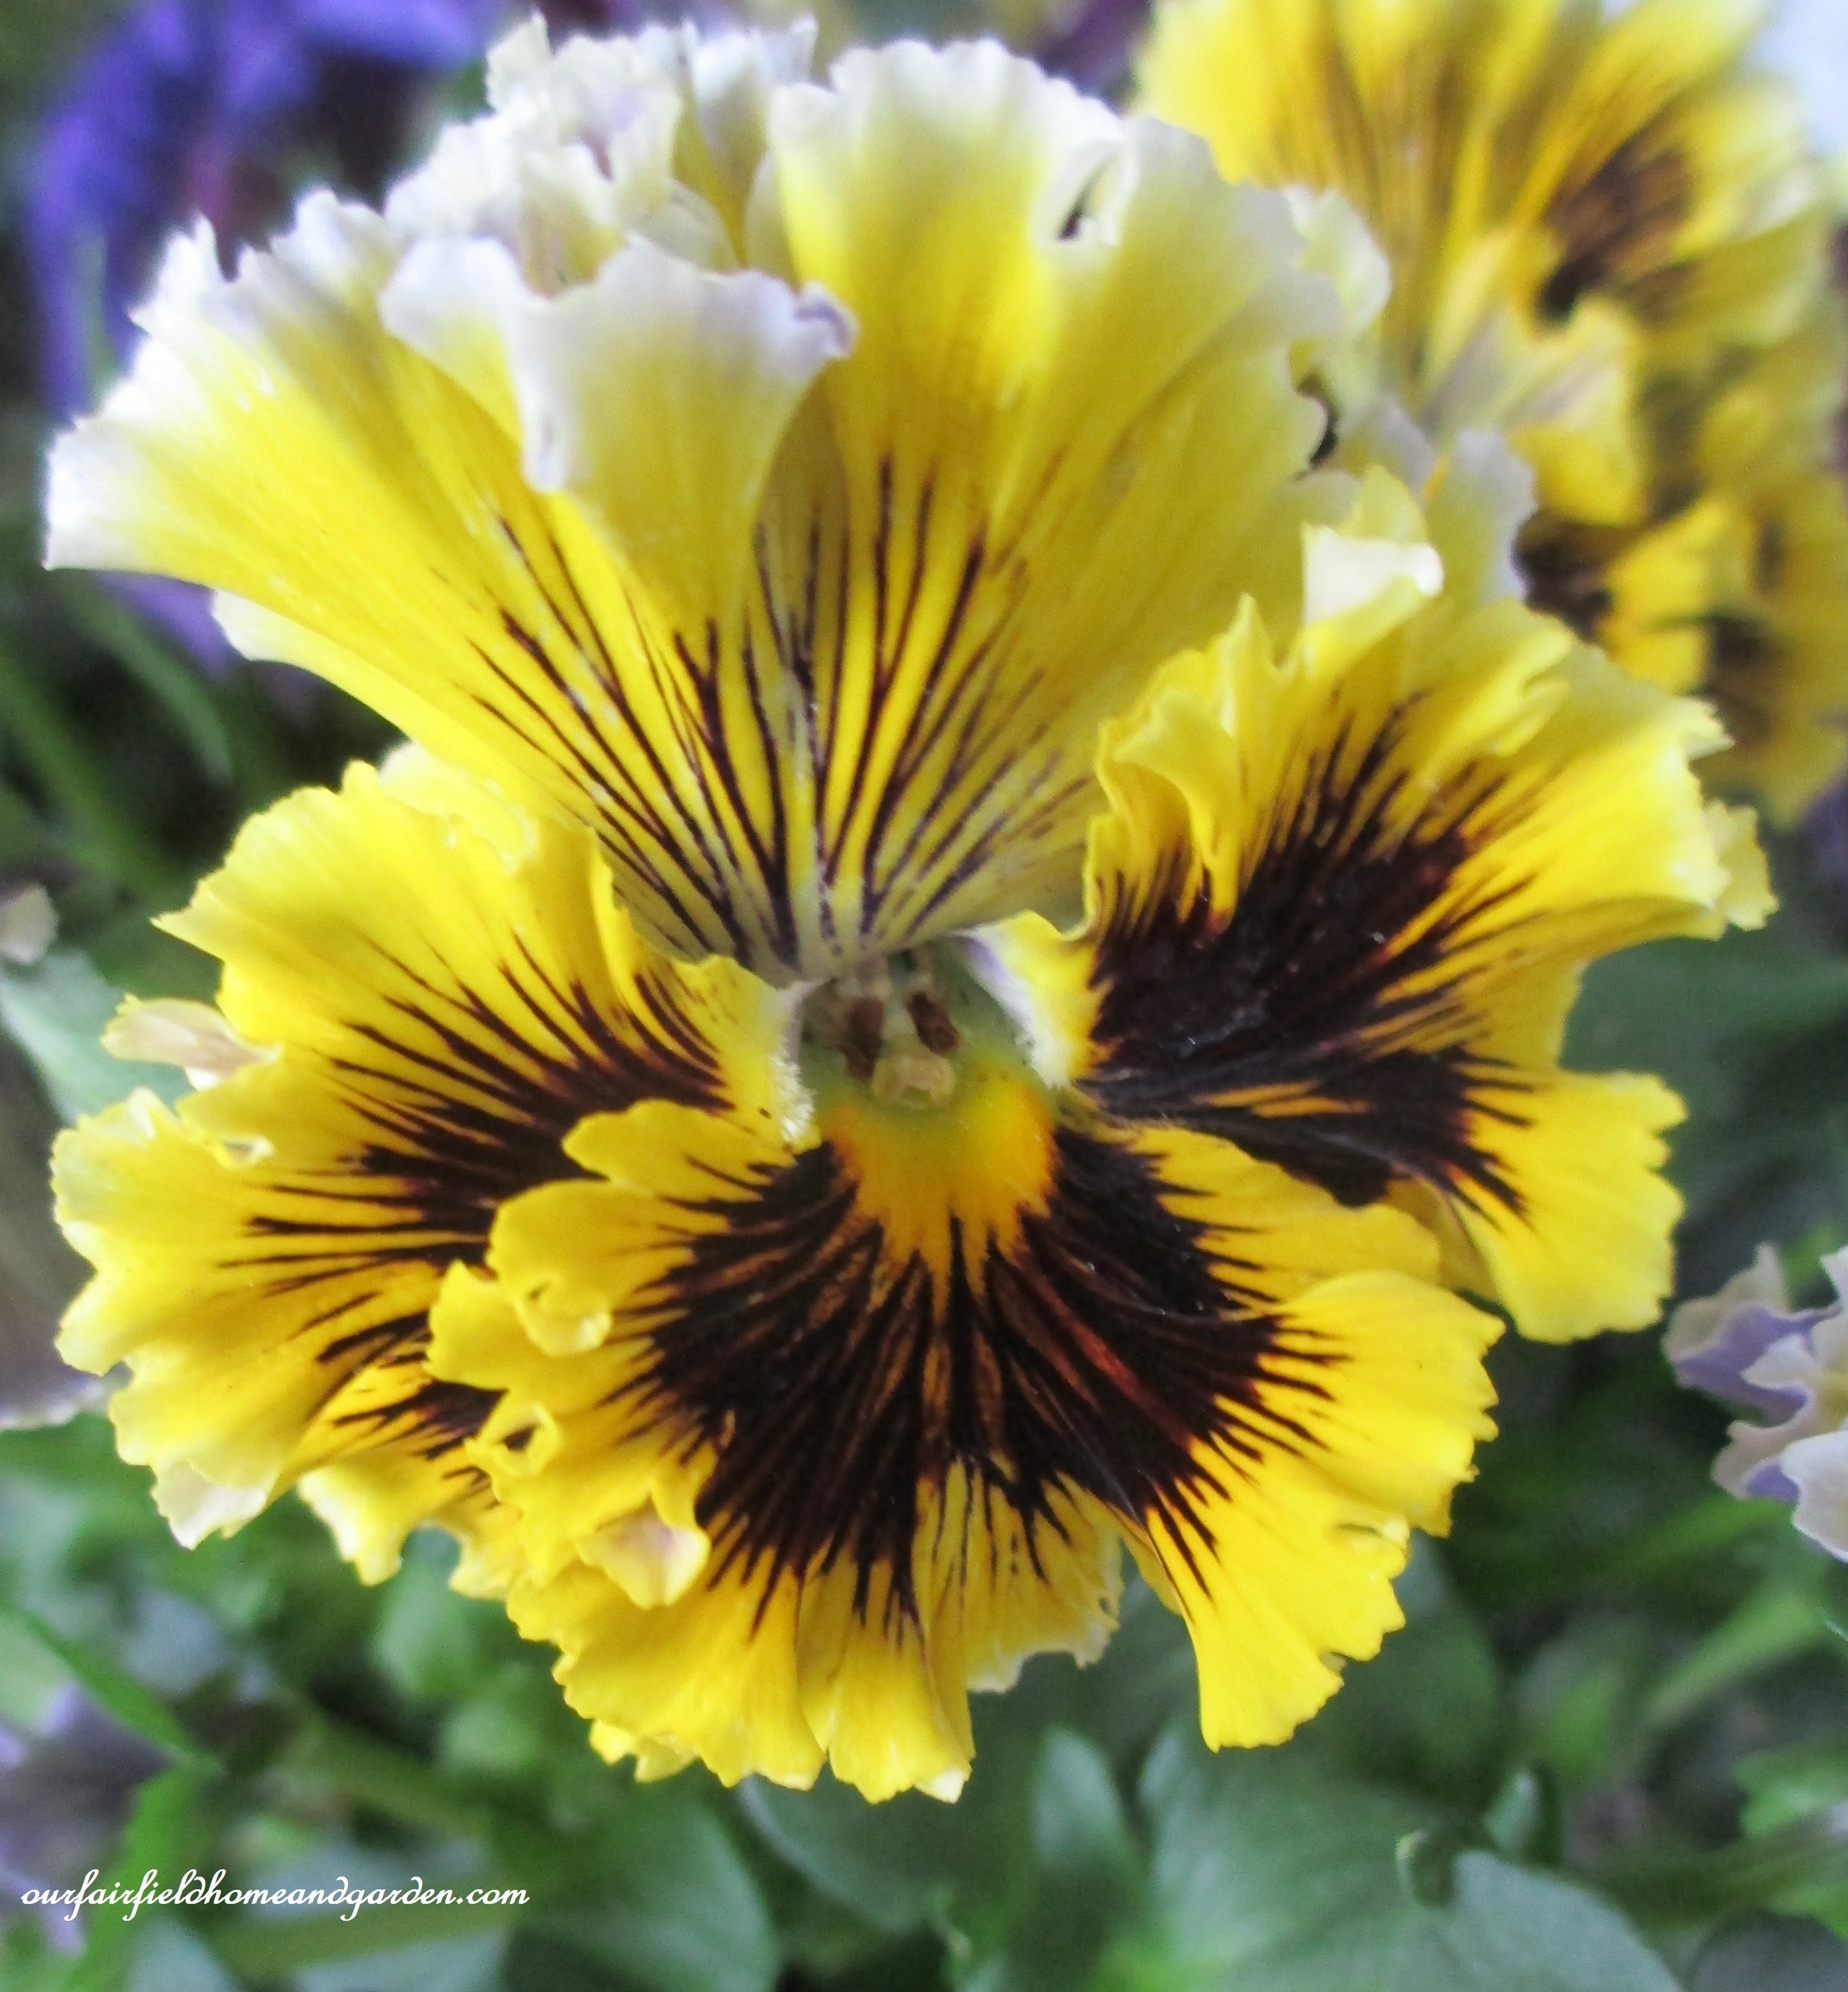 pansy https://ourfairfieldhomeandgarden.com/signs-of-spring-at-our-fairfield-home-garden/